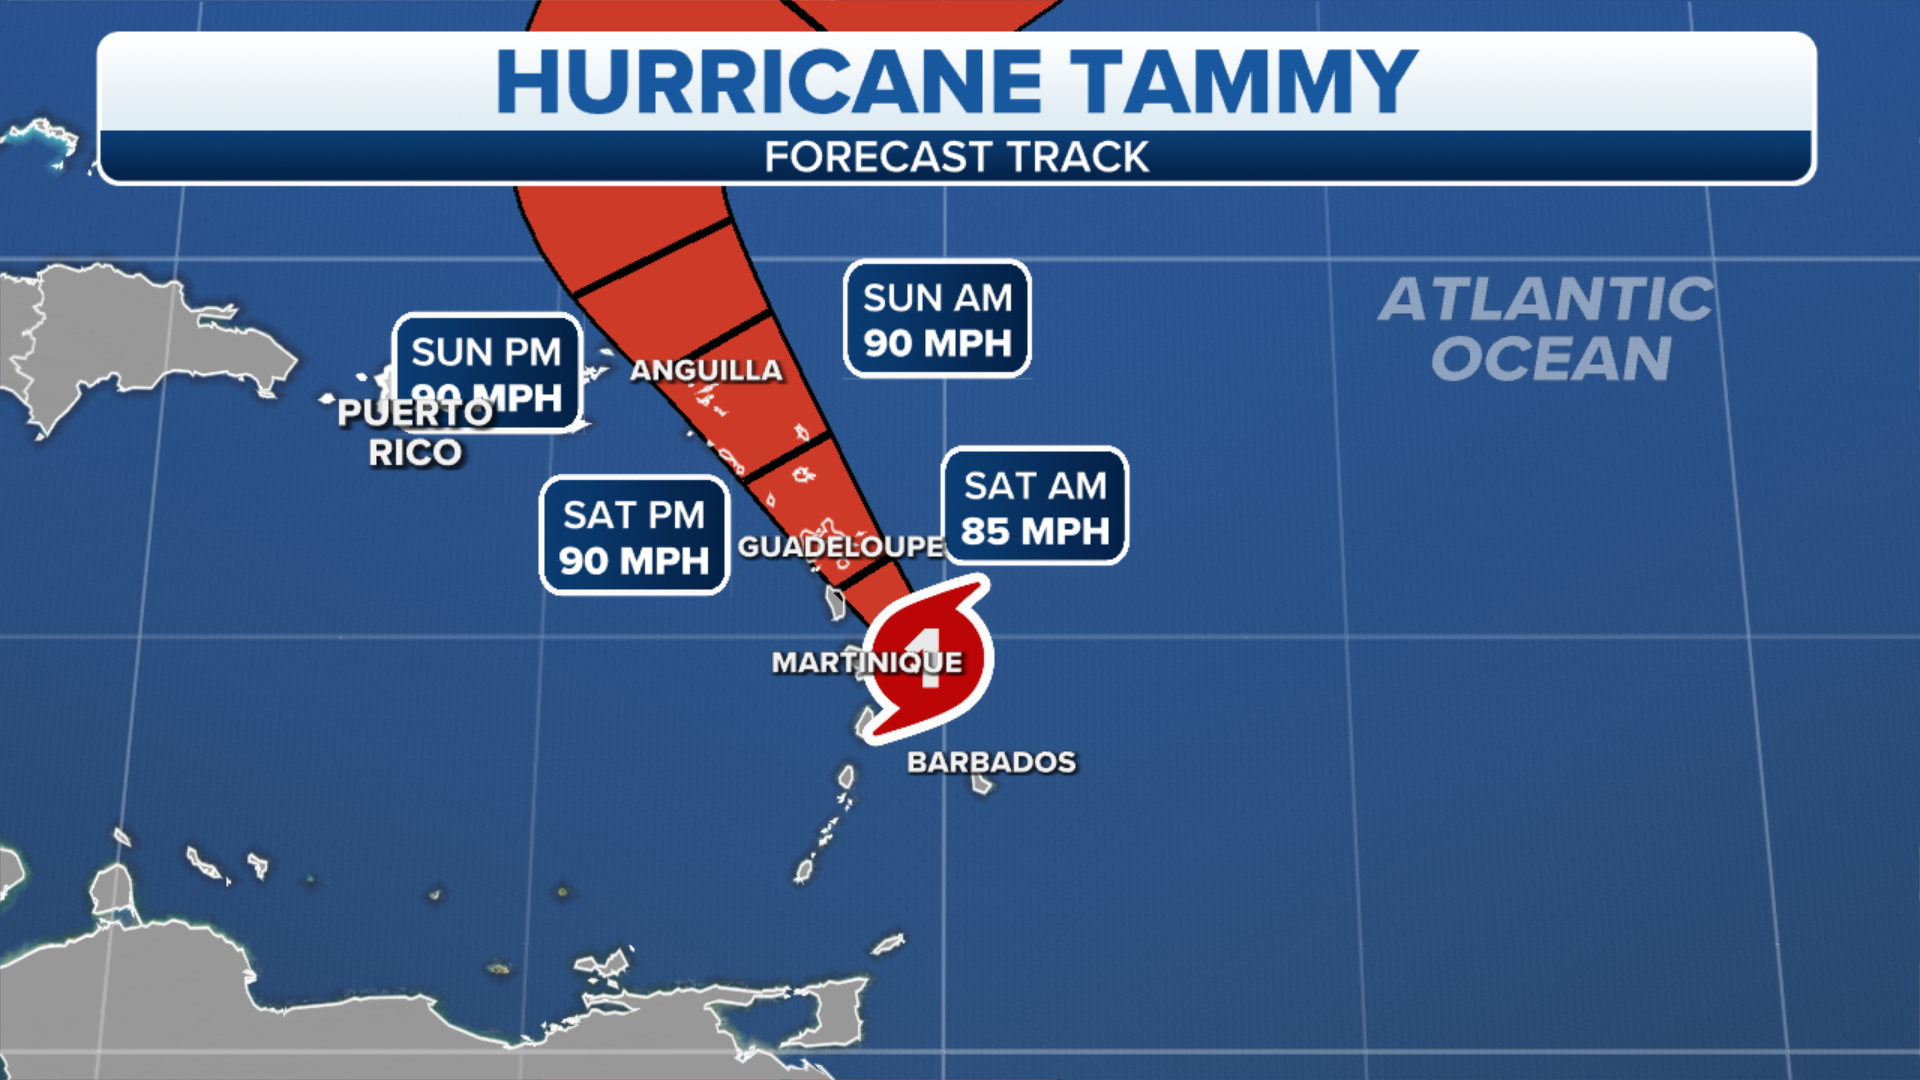 Hurricane Tammy moving through Eastern Caribbean with flooding rain, gusty winds